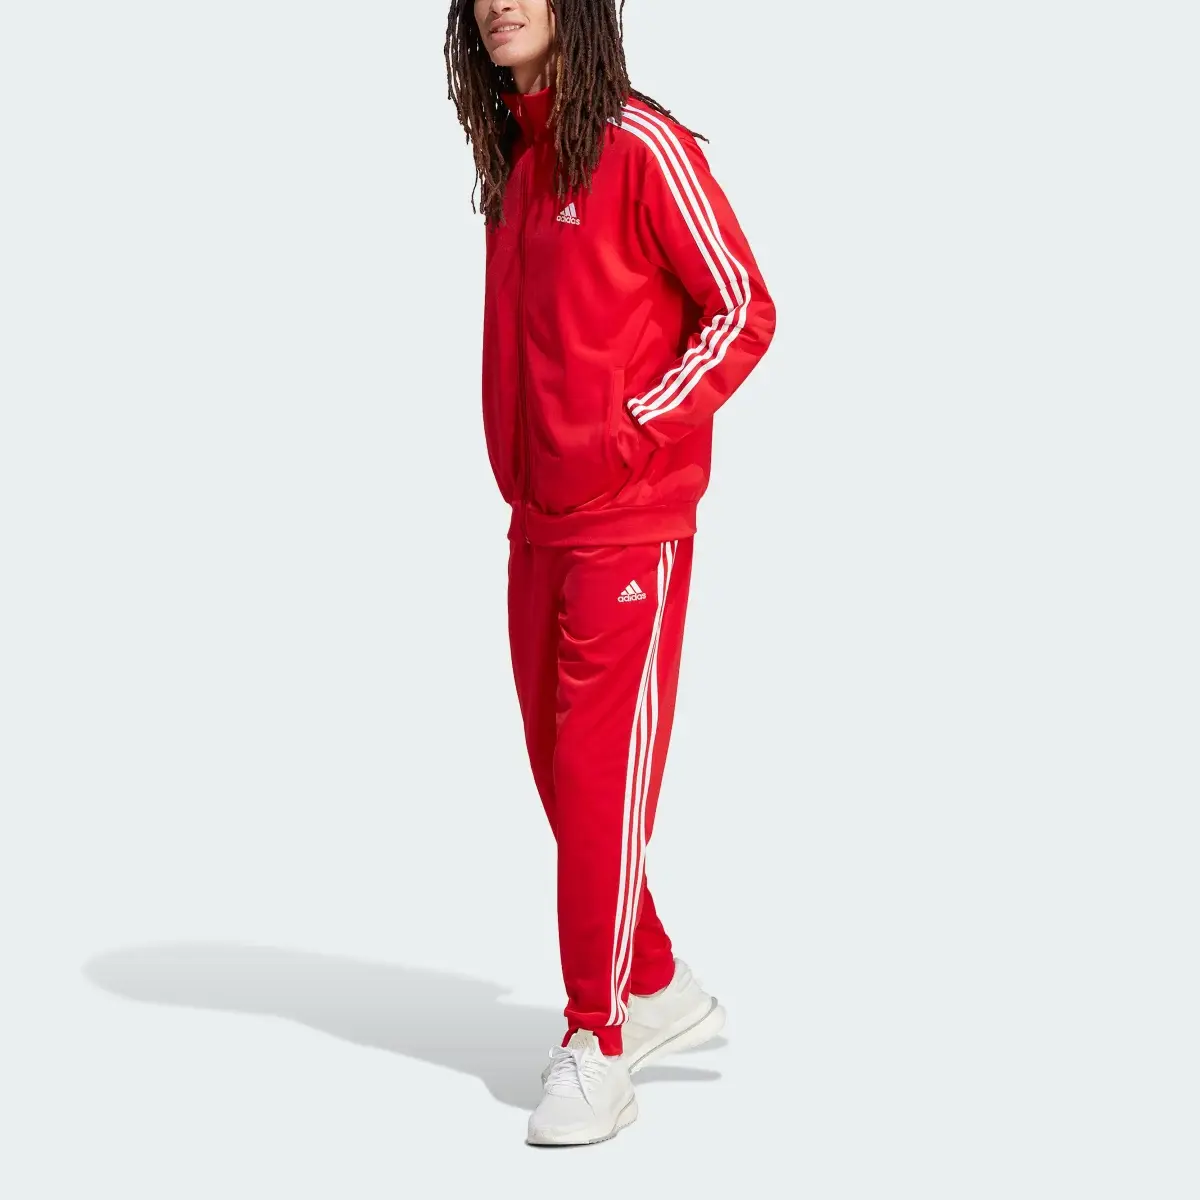 Adidas Basic 3-Stripes Tricot Track Suit. 1